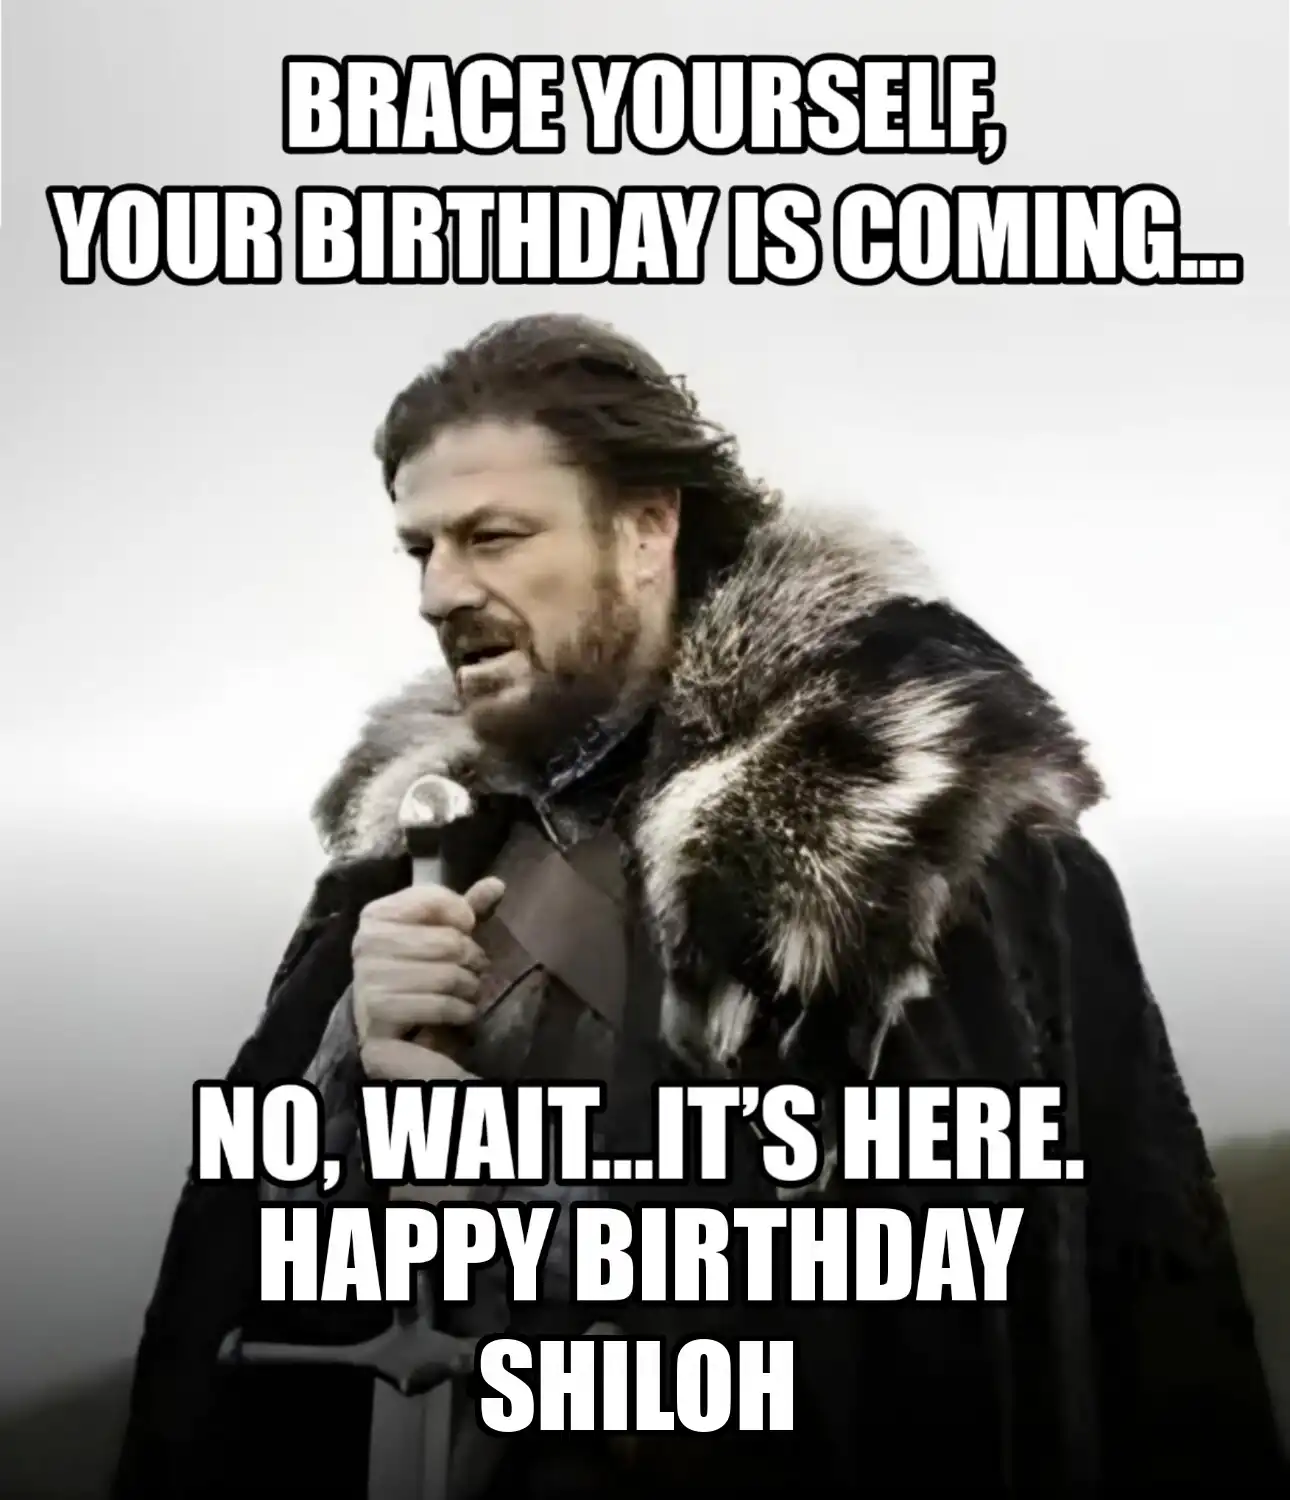 Happy Birthday Shiloh Brace Yourself Your Birthday Is Coming Meme